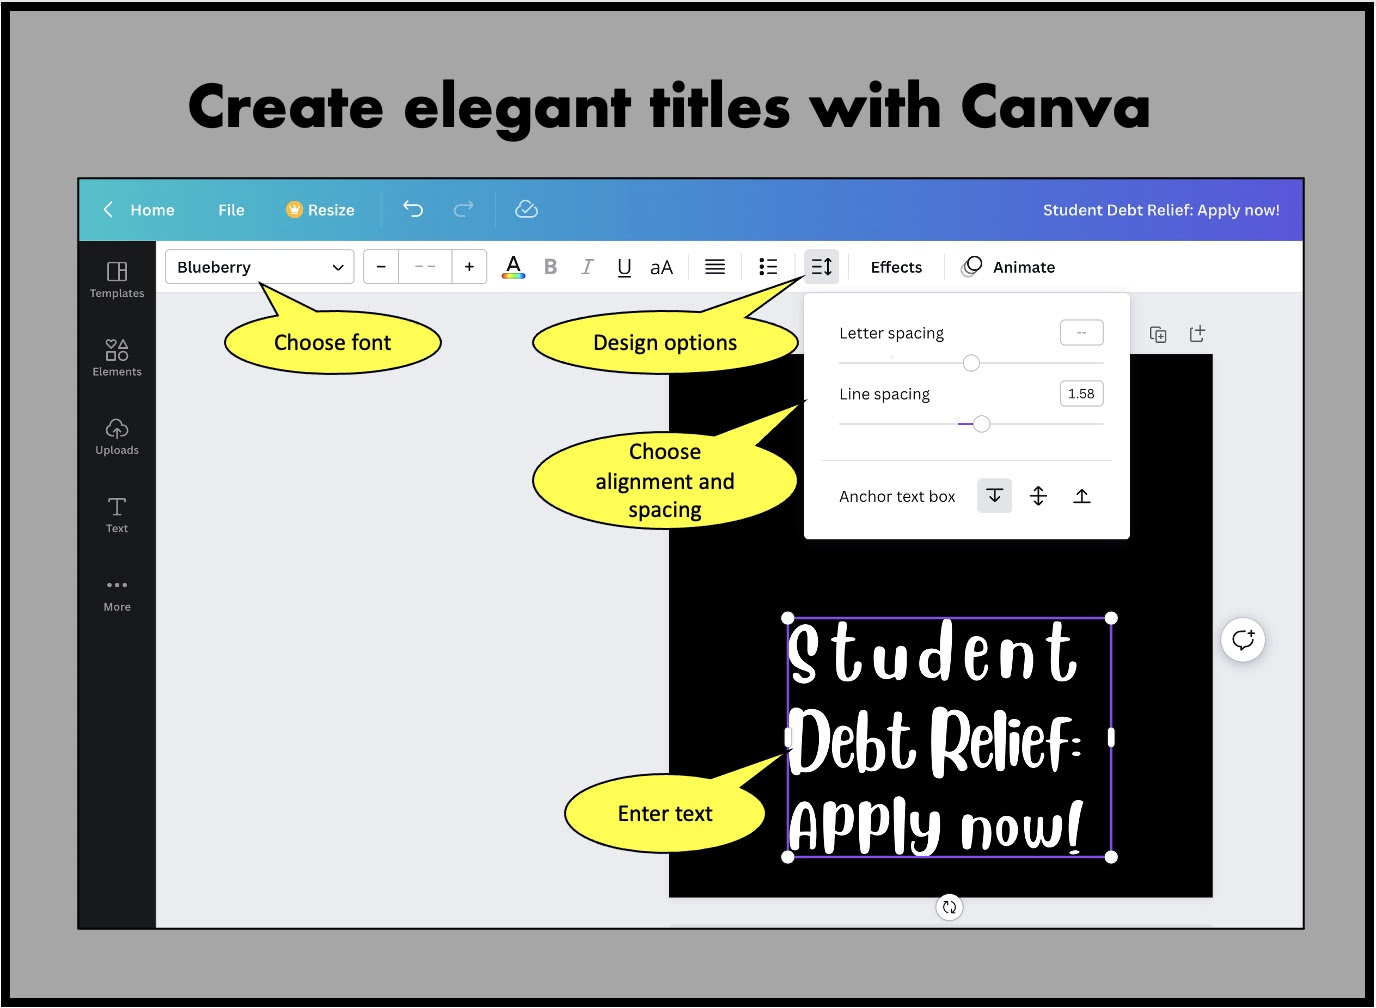 Create elegant titles and documents with Canva.